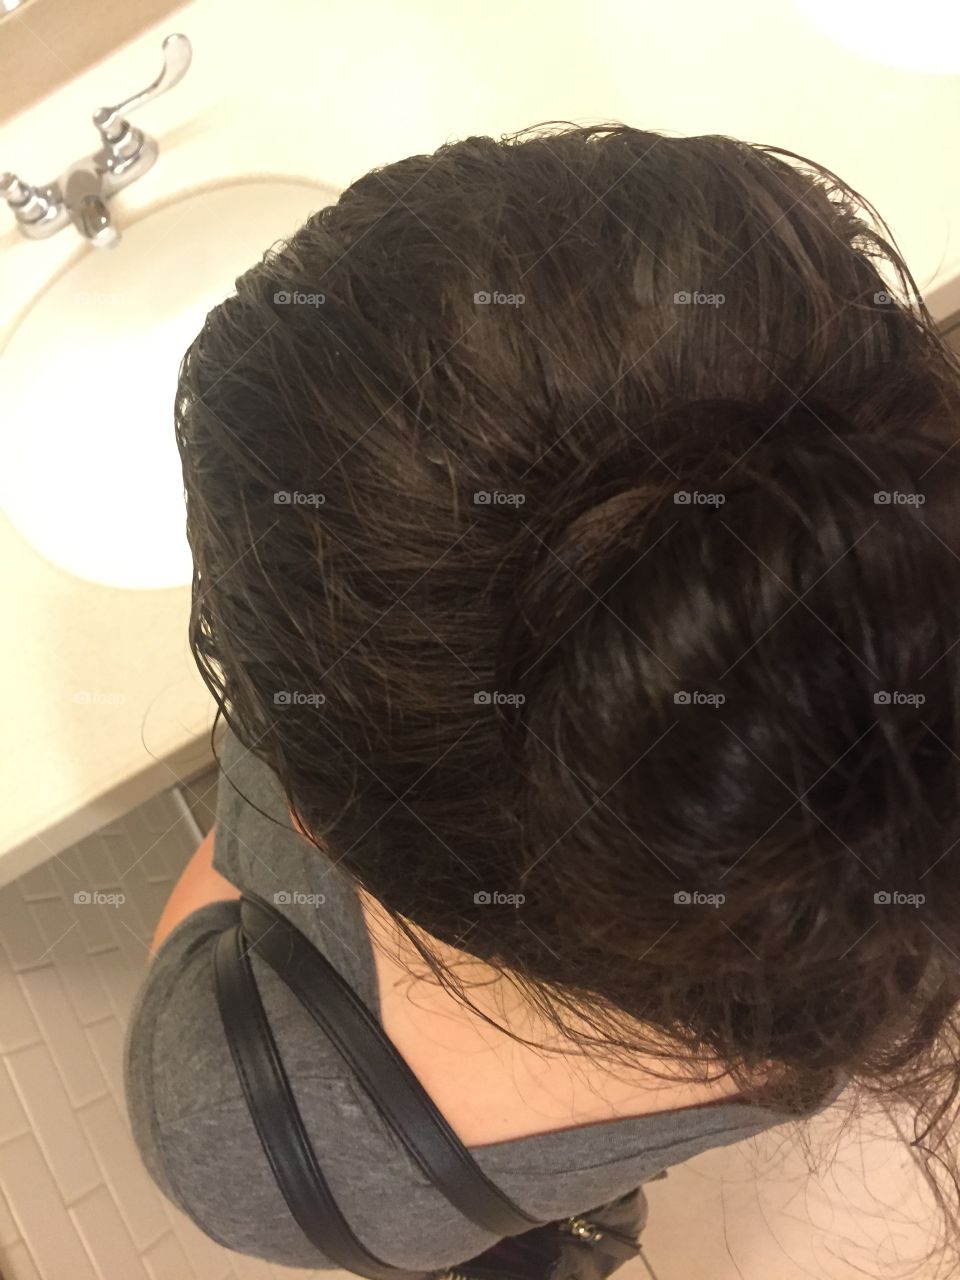 Top view of my hair bun it was also taken at a public bathroom 